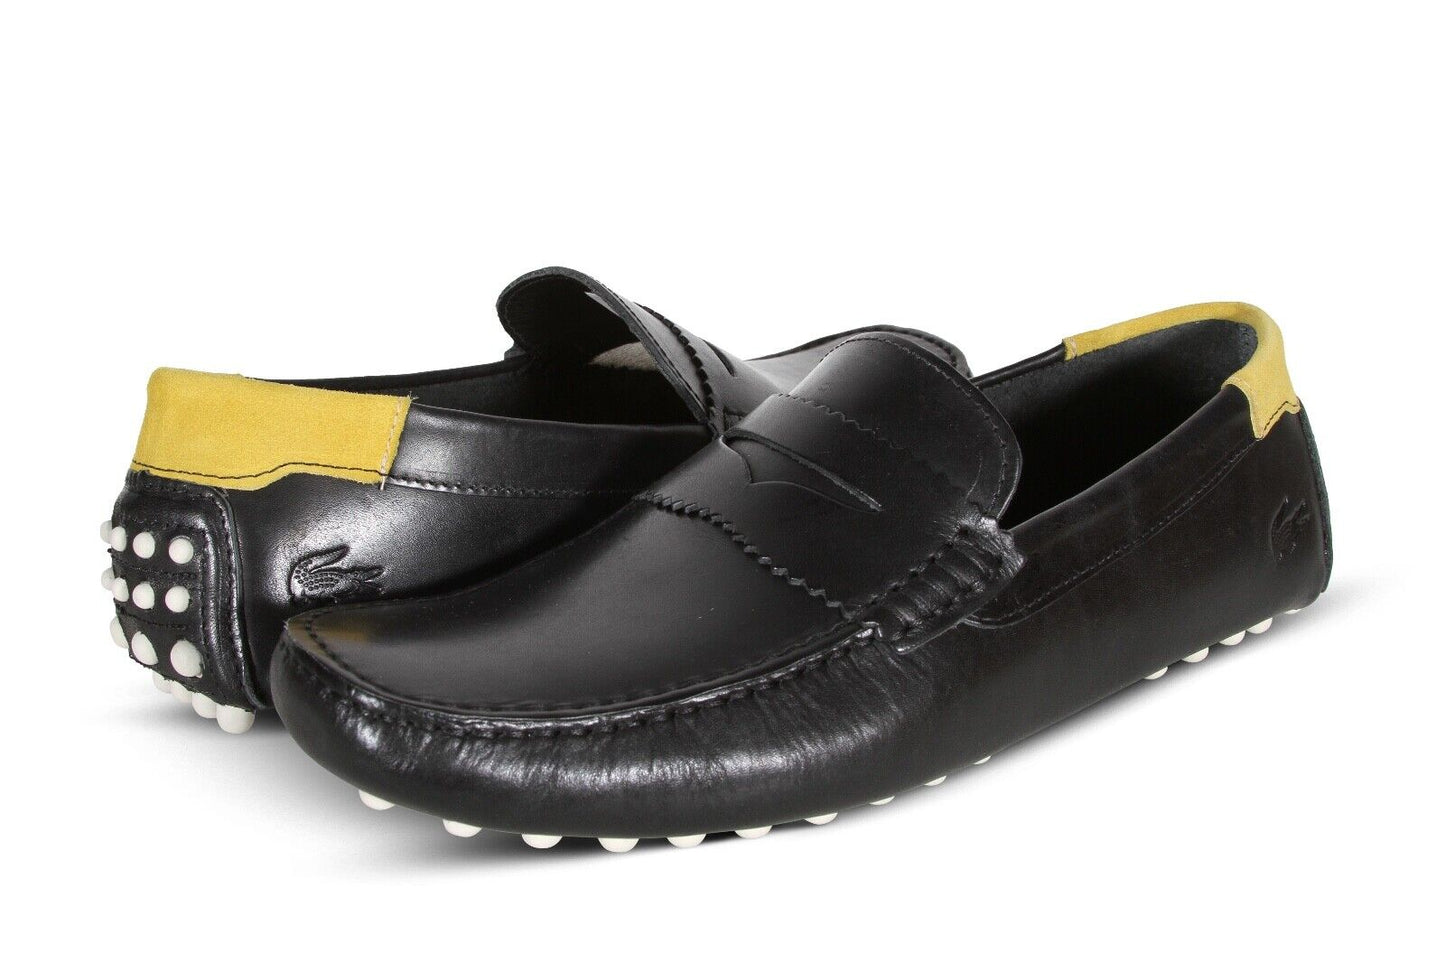 Lacoste Concours 123 1 CMA Men’s Leather Loafers in Black 745CMA0032454